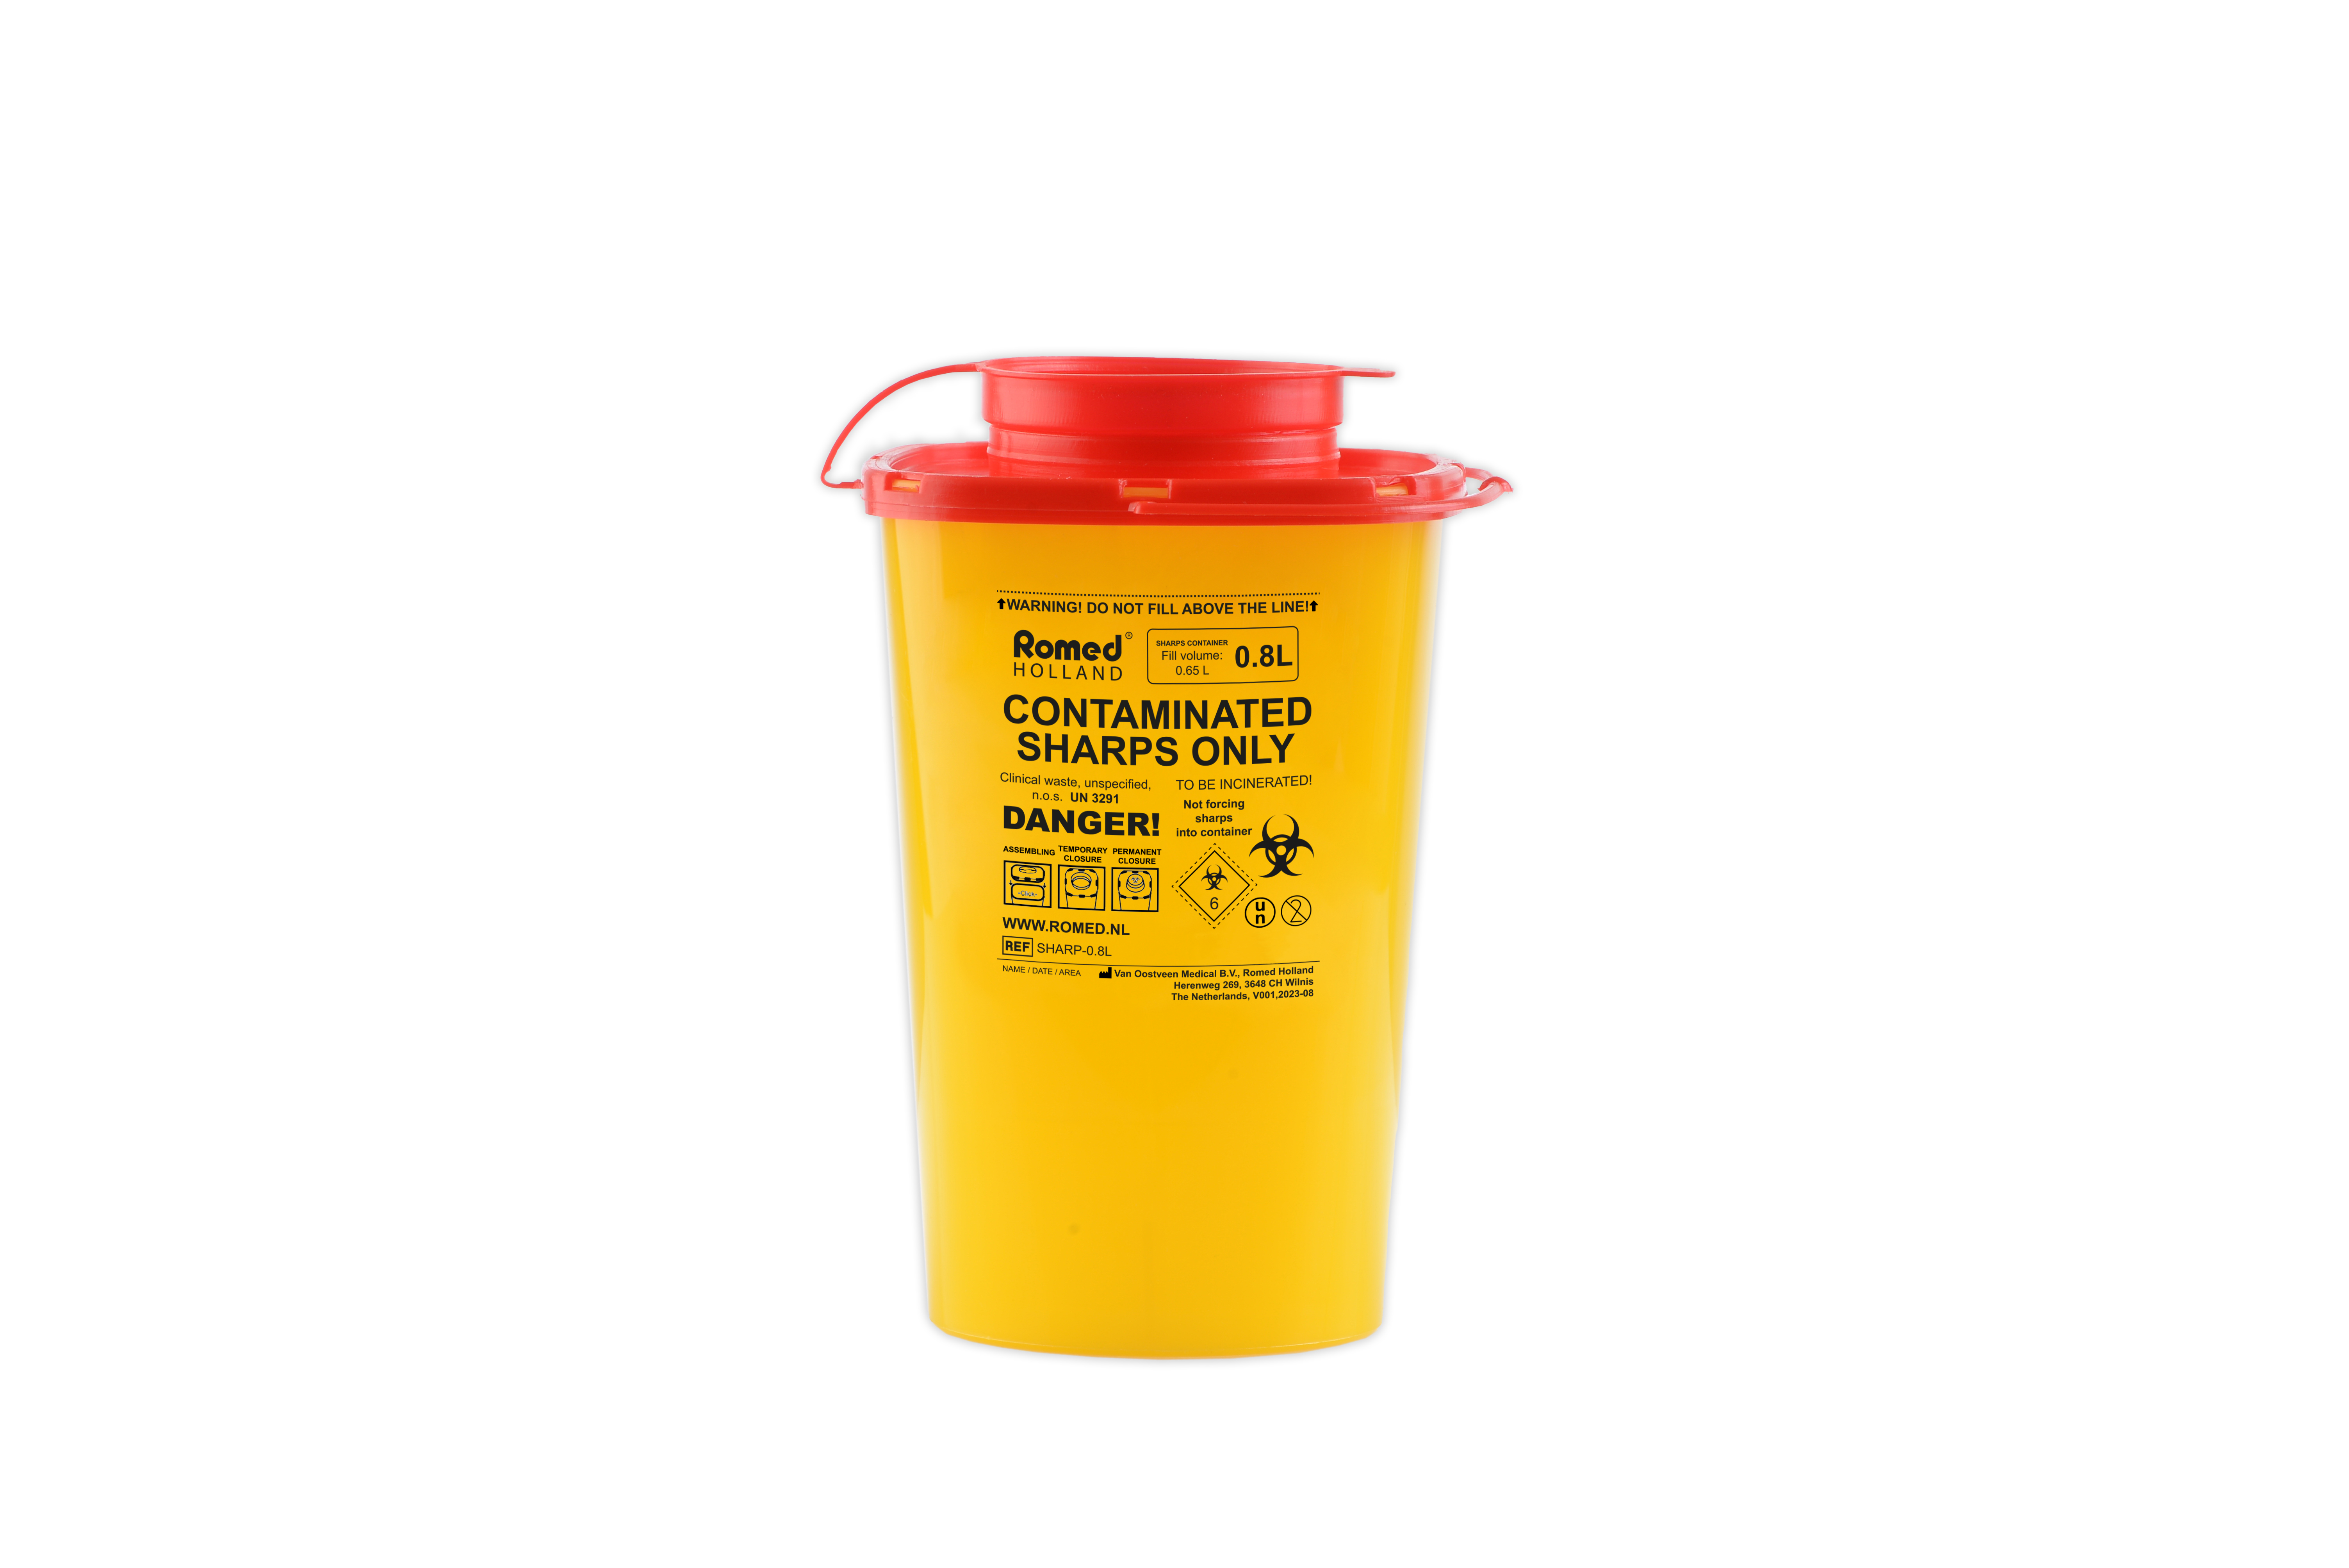 SHARP-0.8L Romed Sharp Container, for clinical waste, 0.8 liter, 140 pcs in a carton.